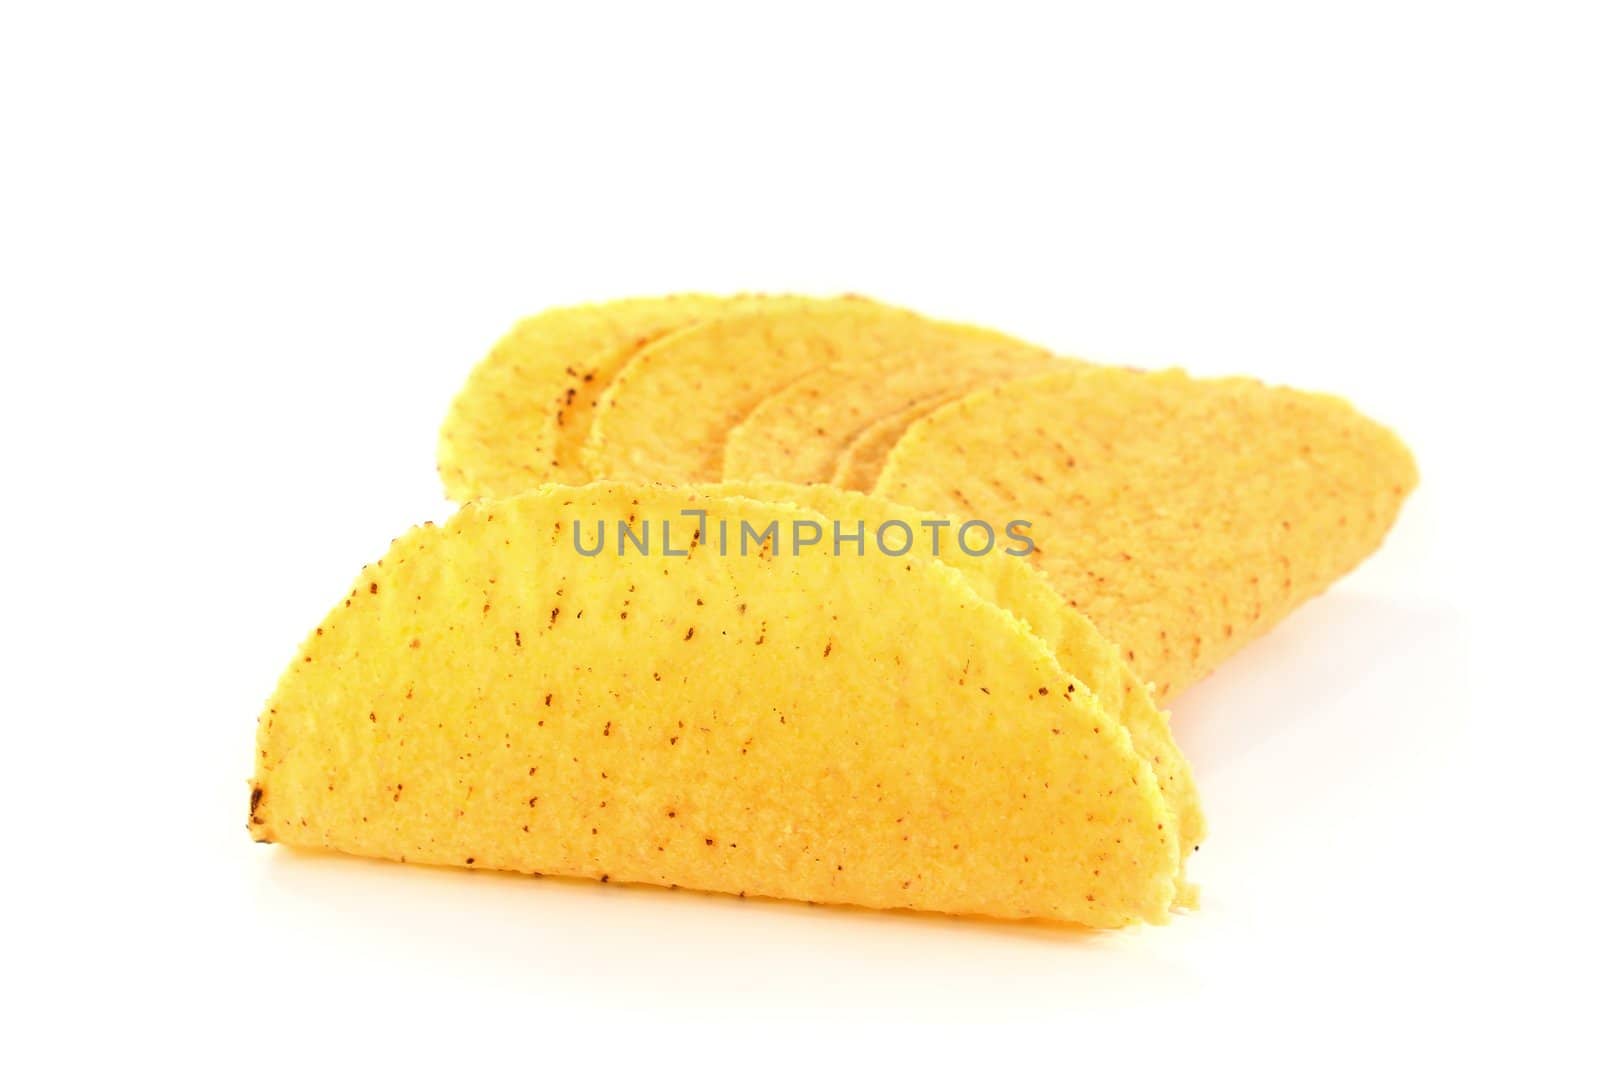 a couple of taco shells on a white background